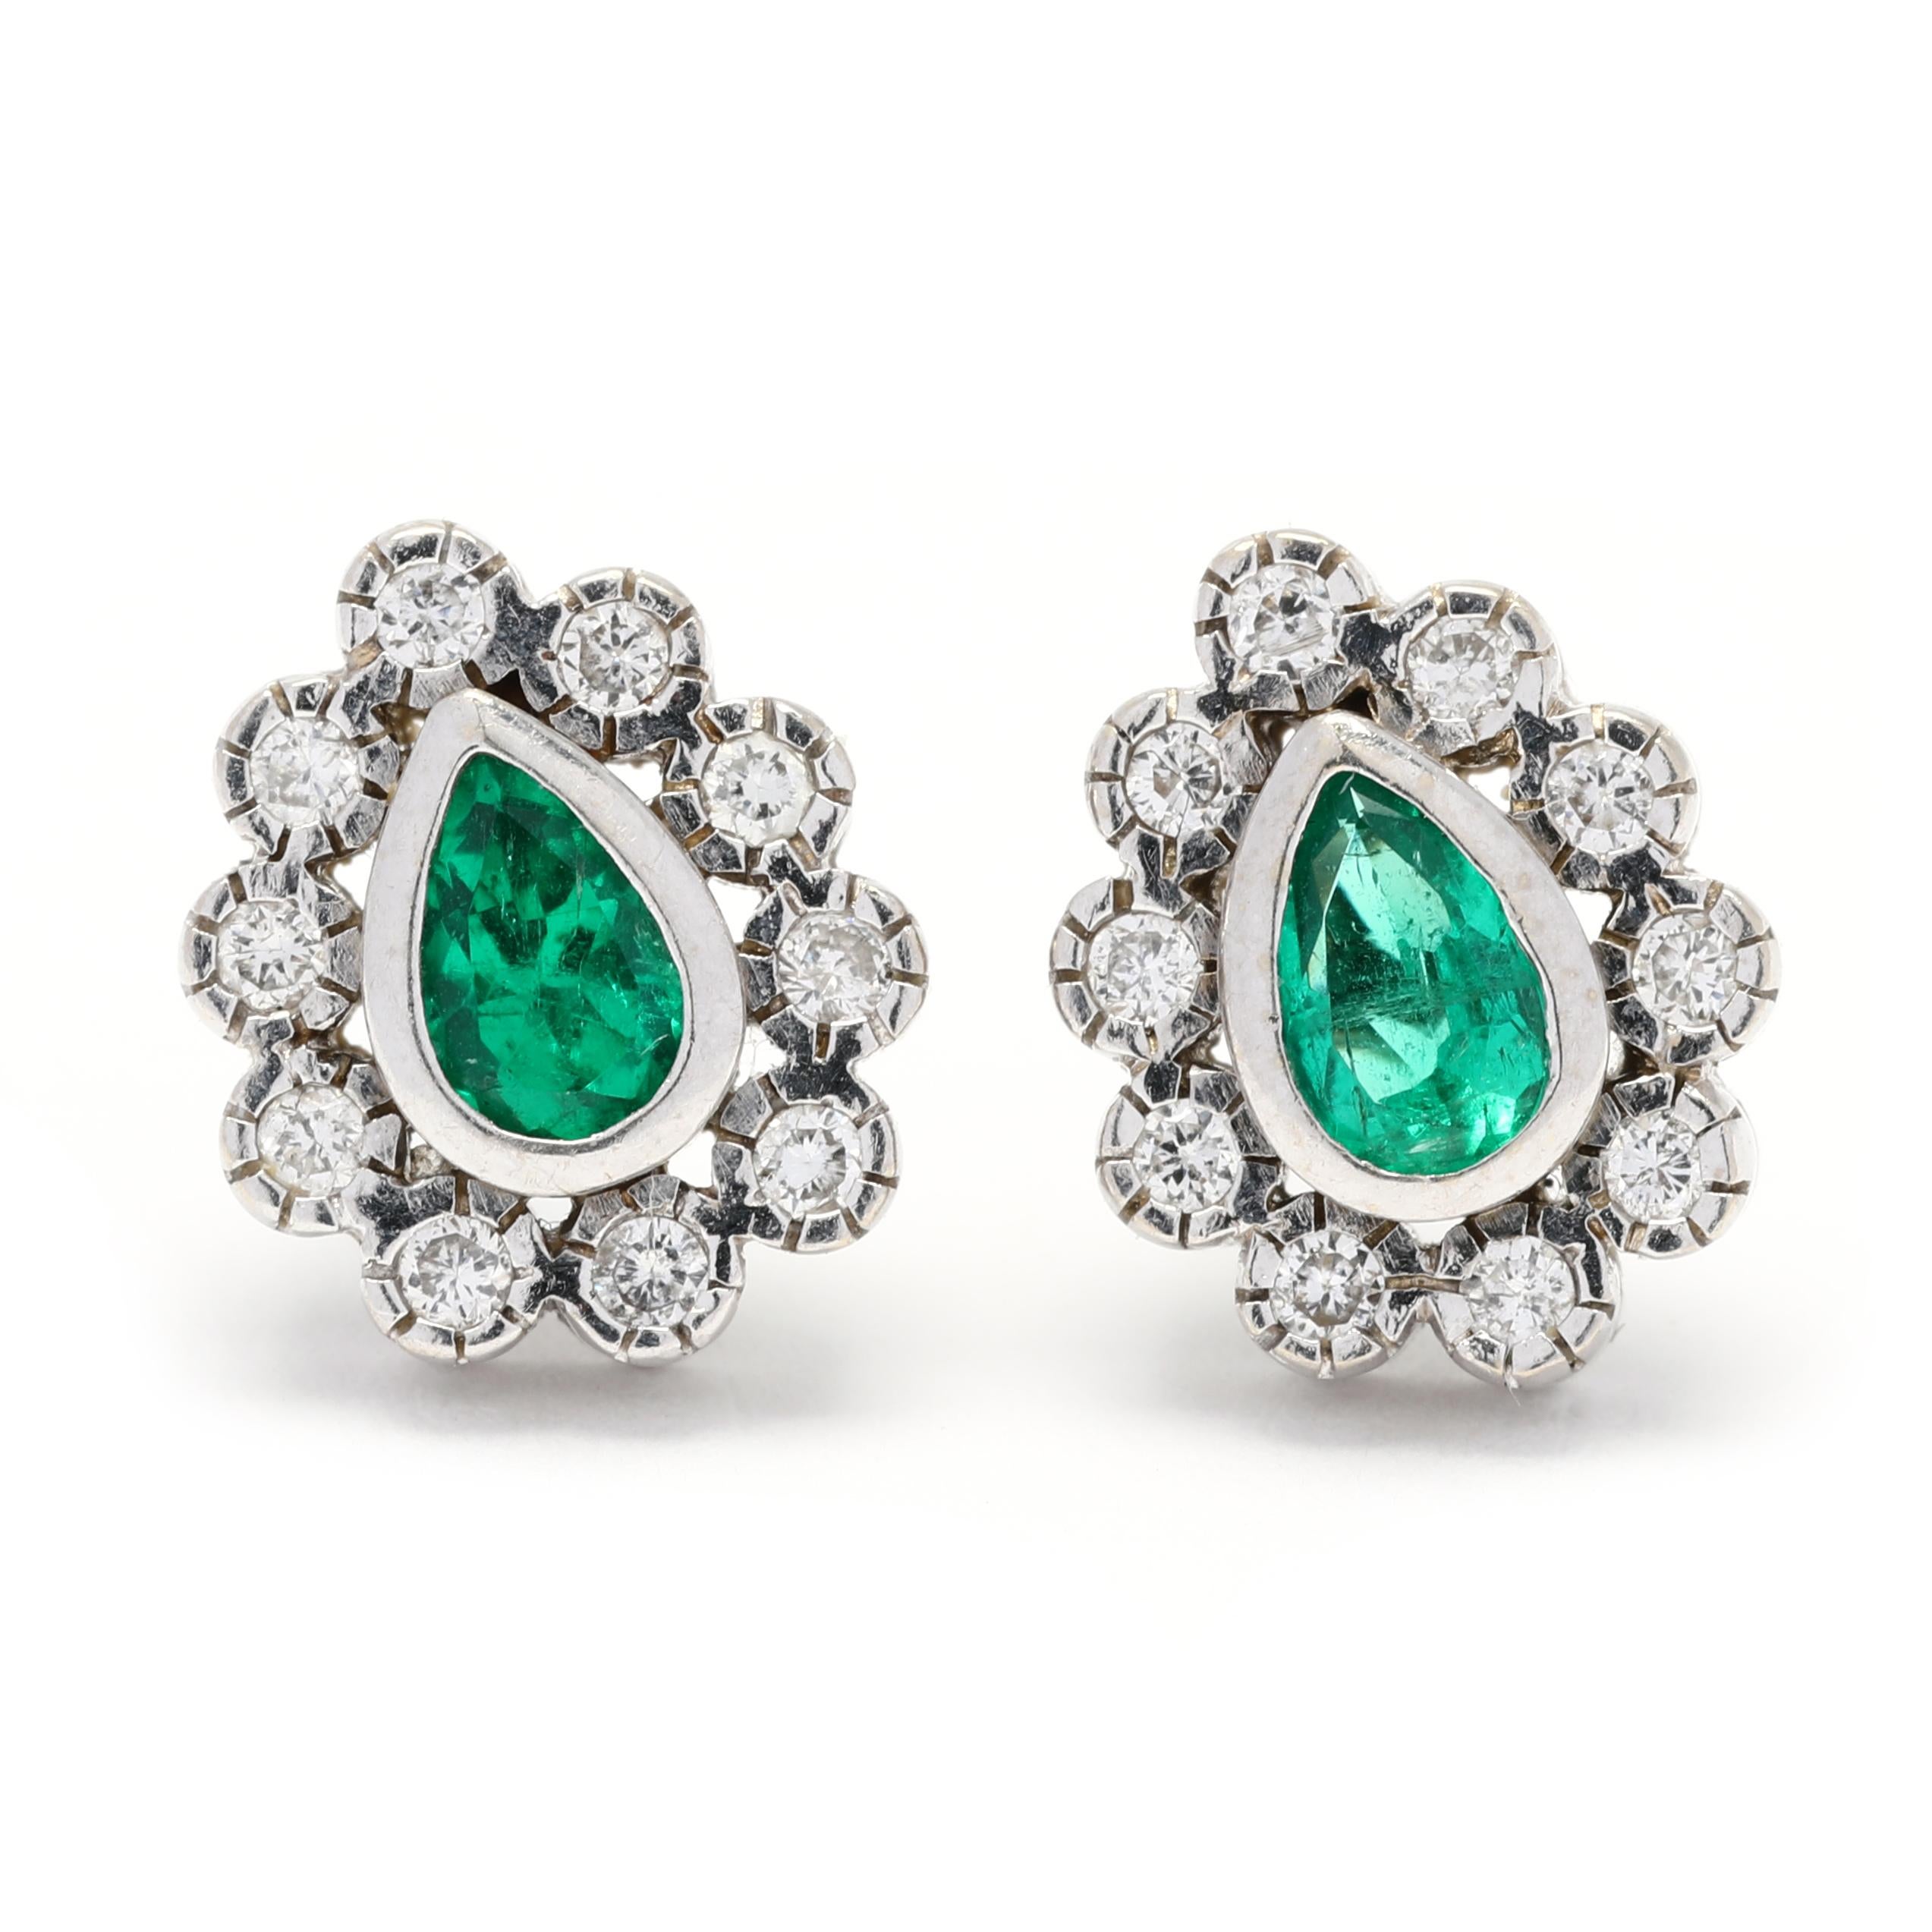 These gorgeous emerald diamond cluster earrings are a stunning piece of jewelry that will add elegance and sophistication to any outfit. Crafted in 18K white gold, the earrings feature two pear-shaped emeralds and sparkling round diamonds. The